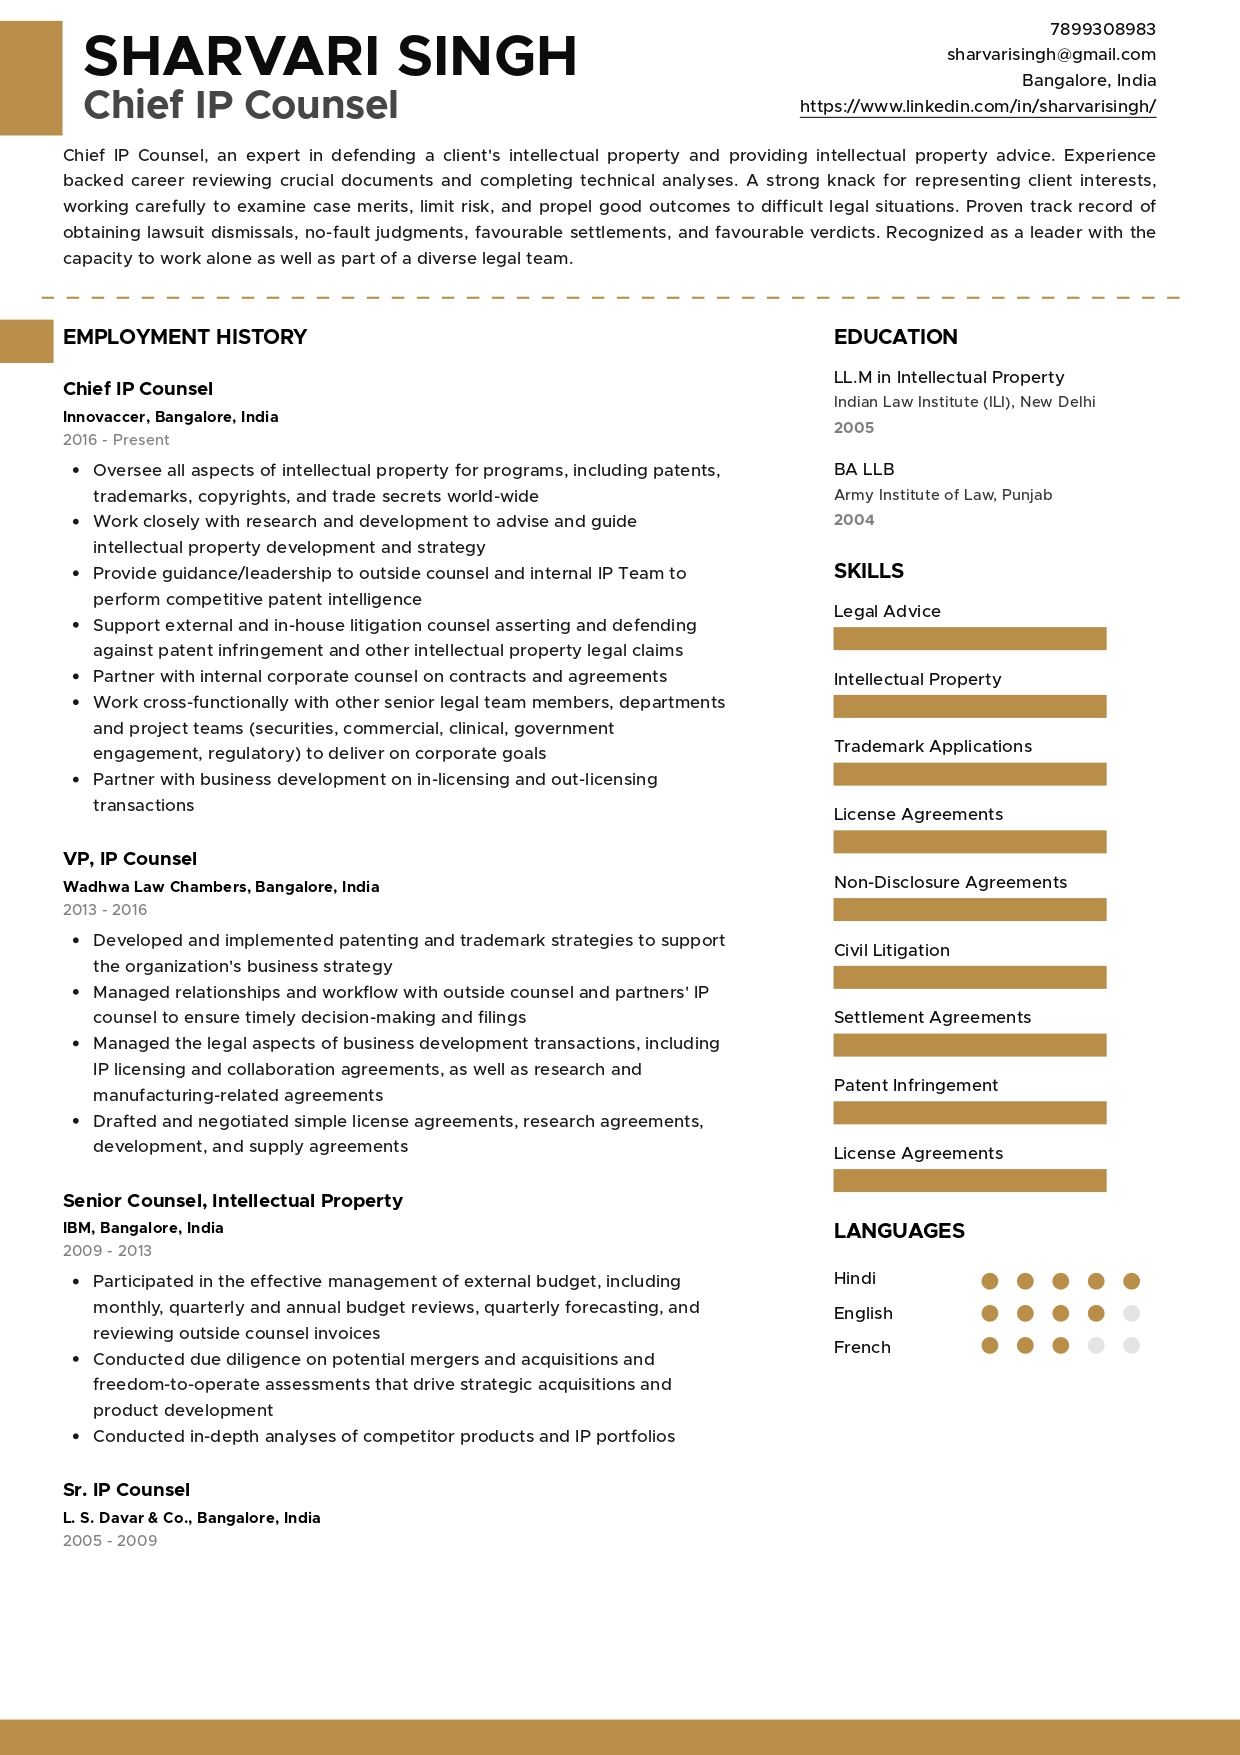 Sample Resume of Chief IP Counsel | Free Resume Templates & Samples on Resumod.co